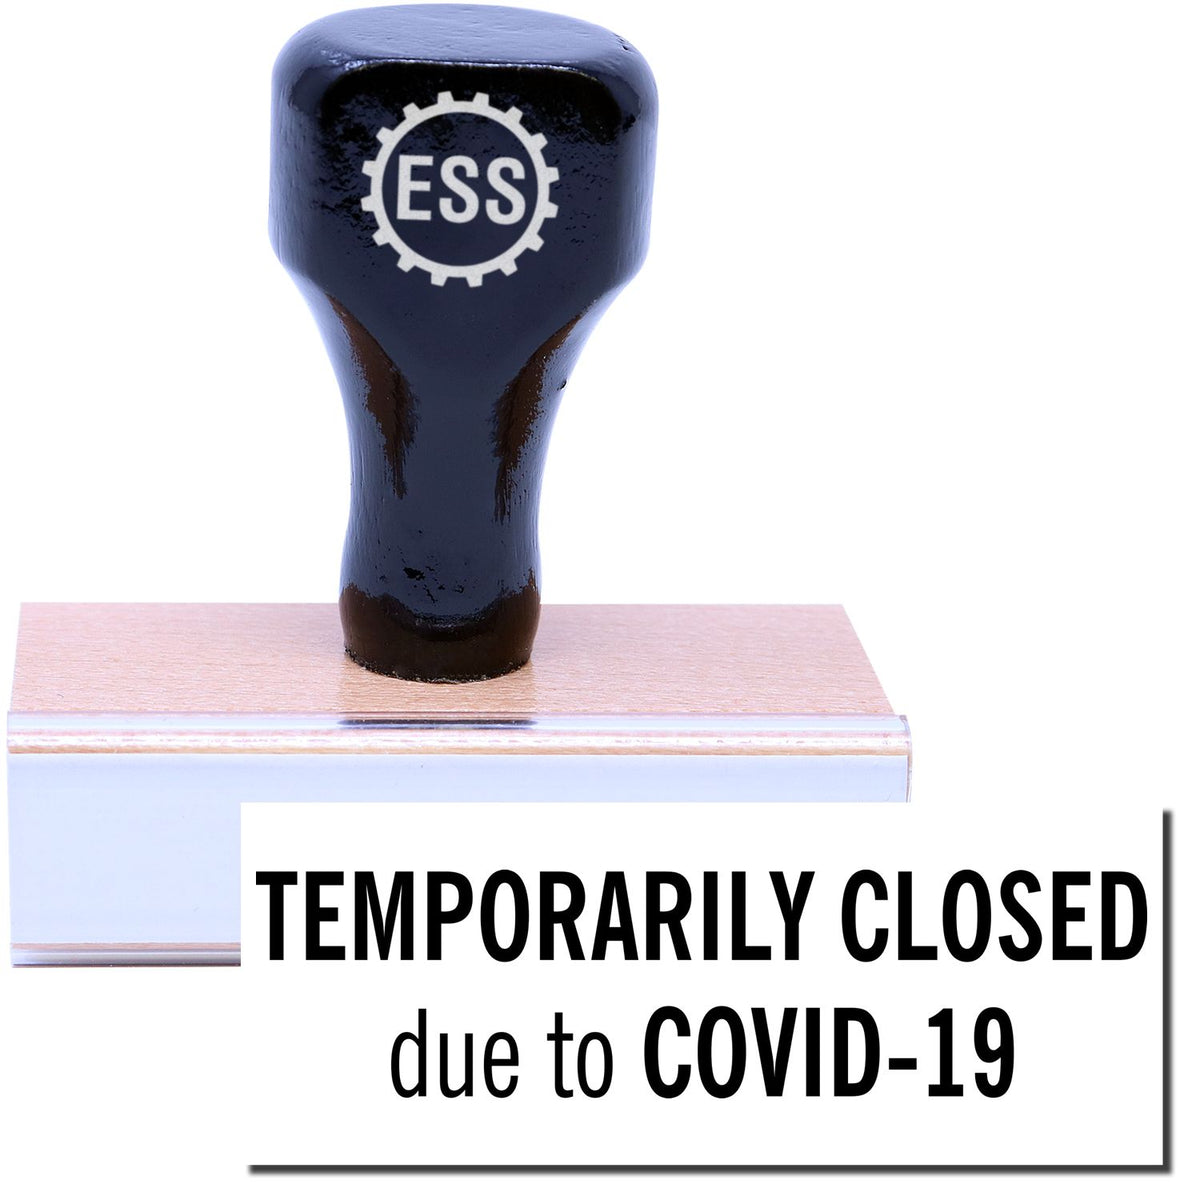 A stock office rubber stamp with a stamped image showing how the text &quot;TEMPORARILY CLOSED due to COVID-19&quot; is displayed after stamping.